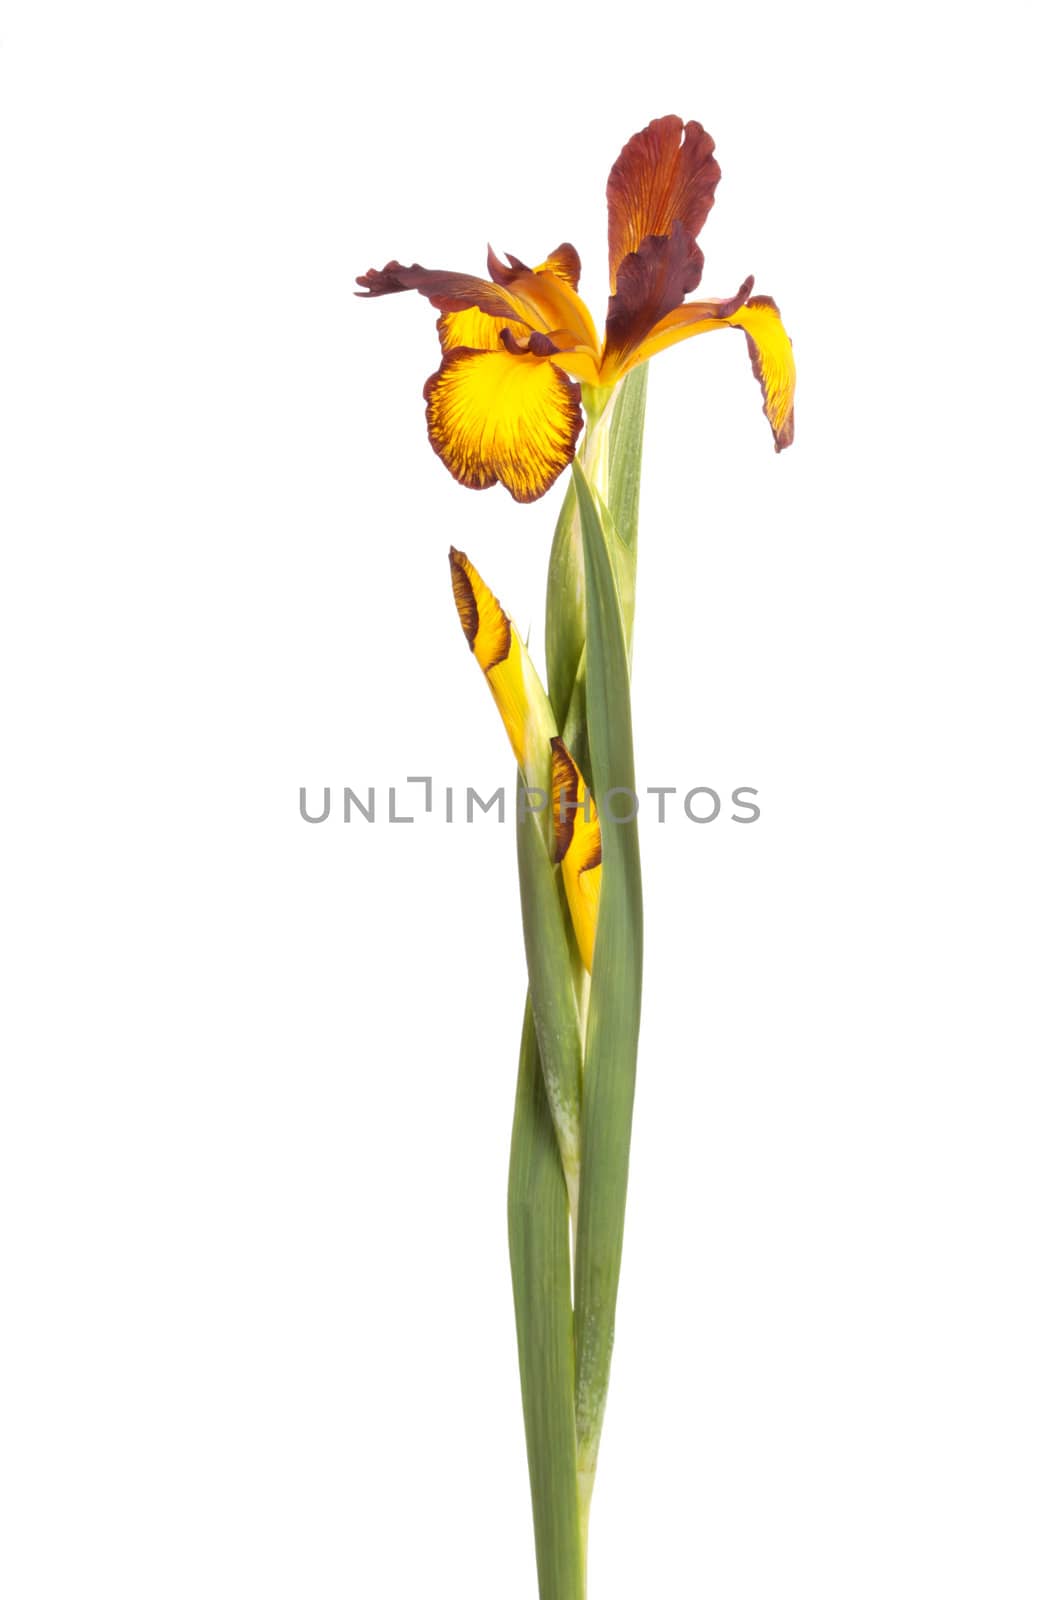 Stem with an open flower and two buds of a yellow and brown Spuria iris isolated against a white background